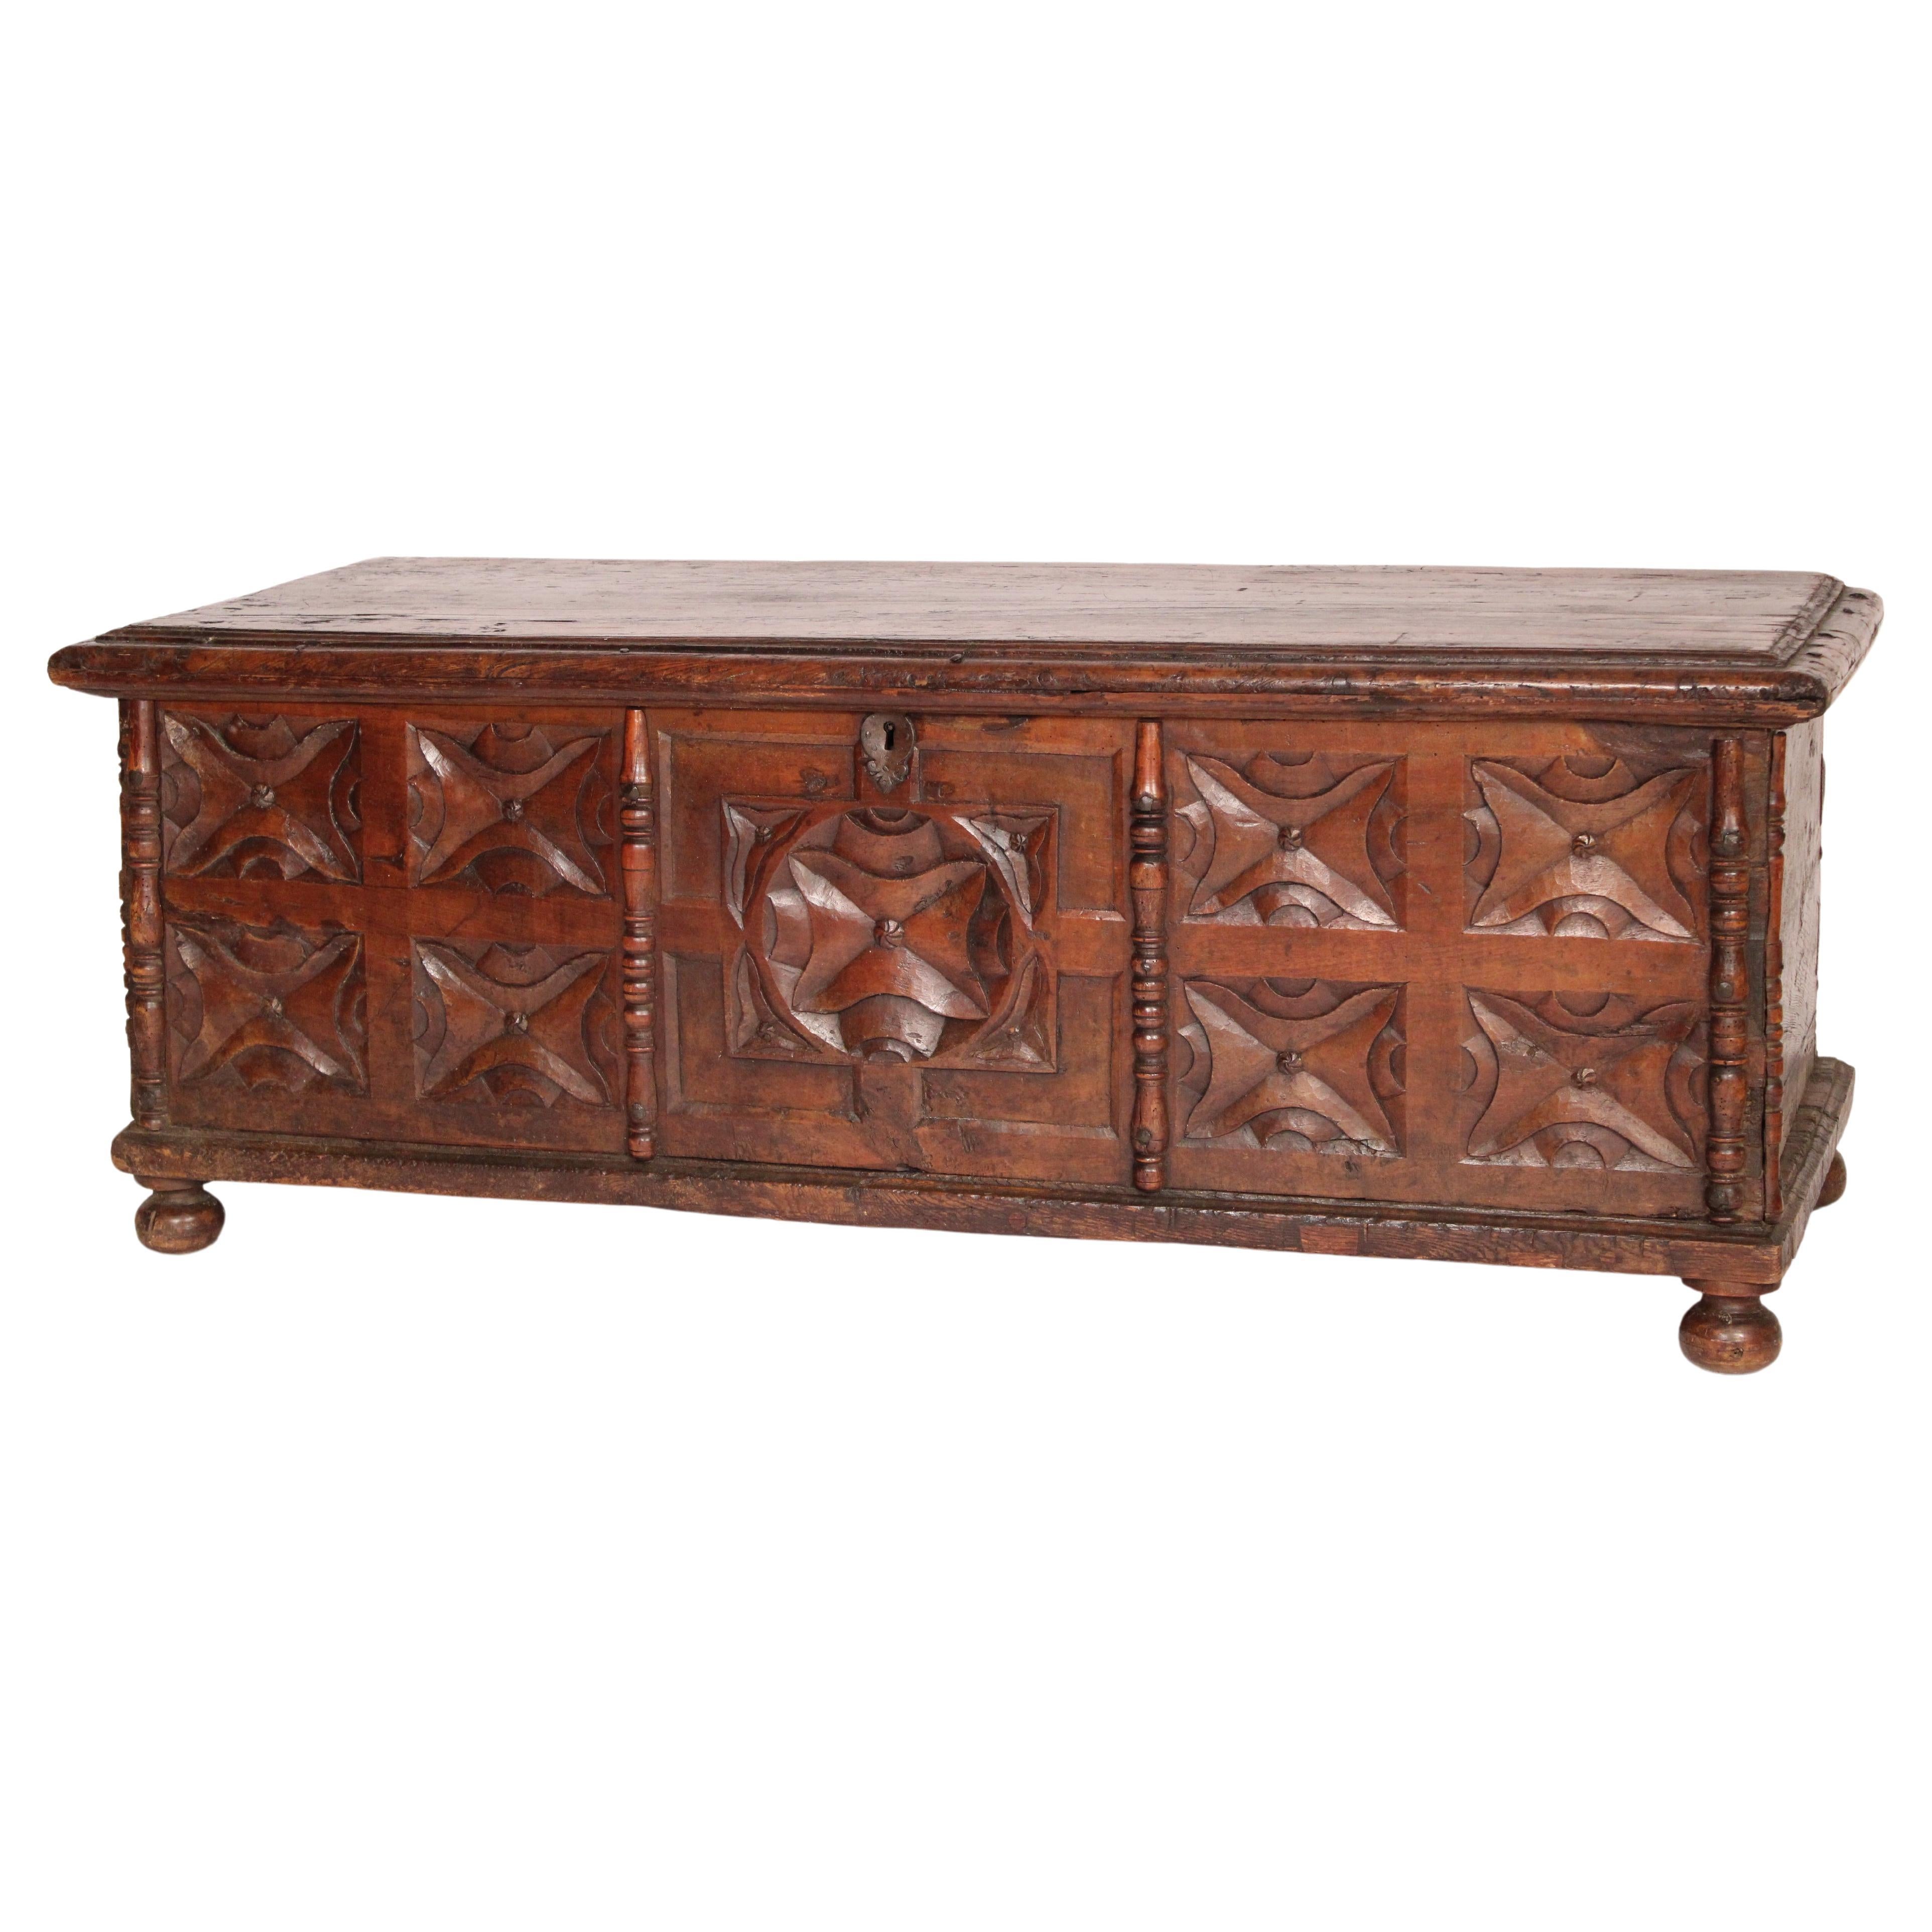 Continental Antique Baroque Style Trunk